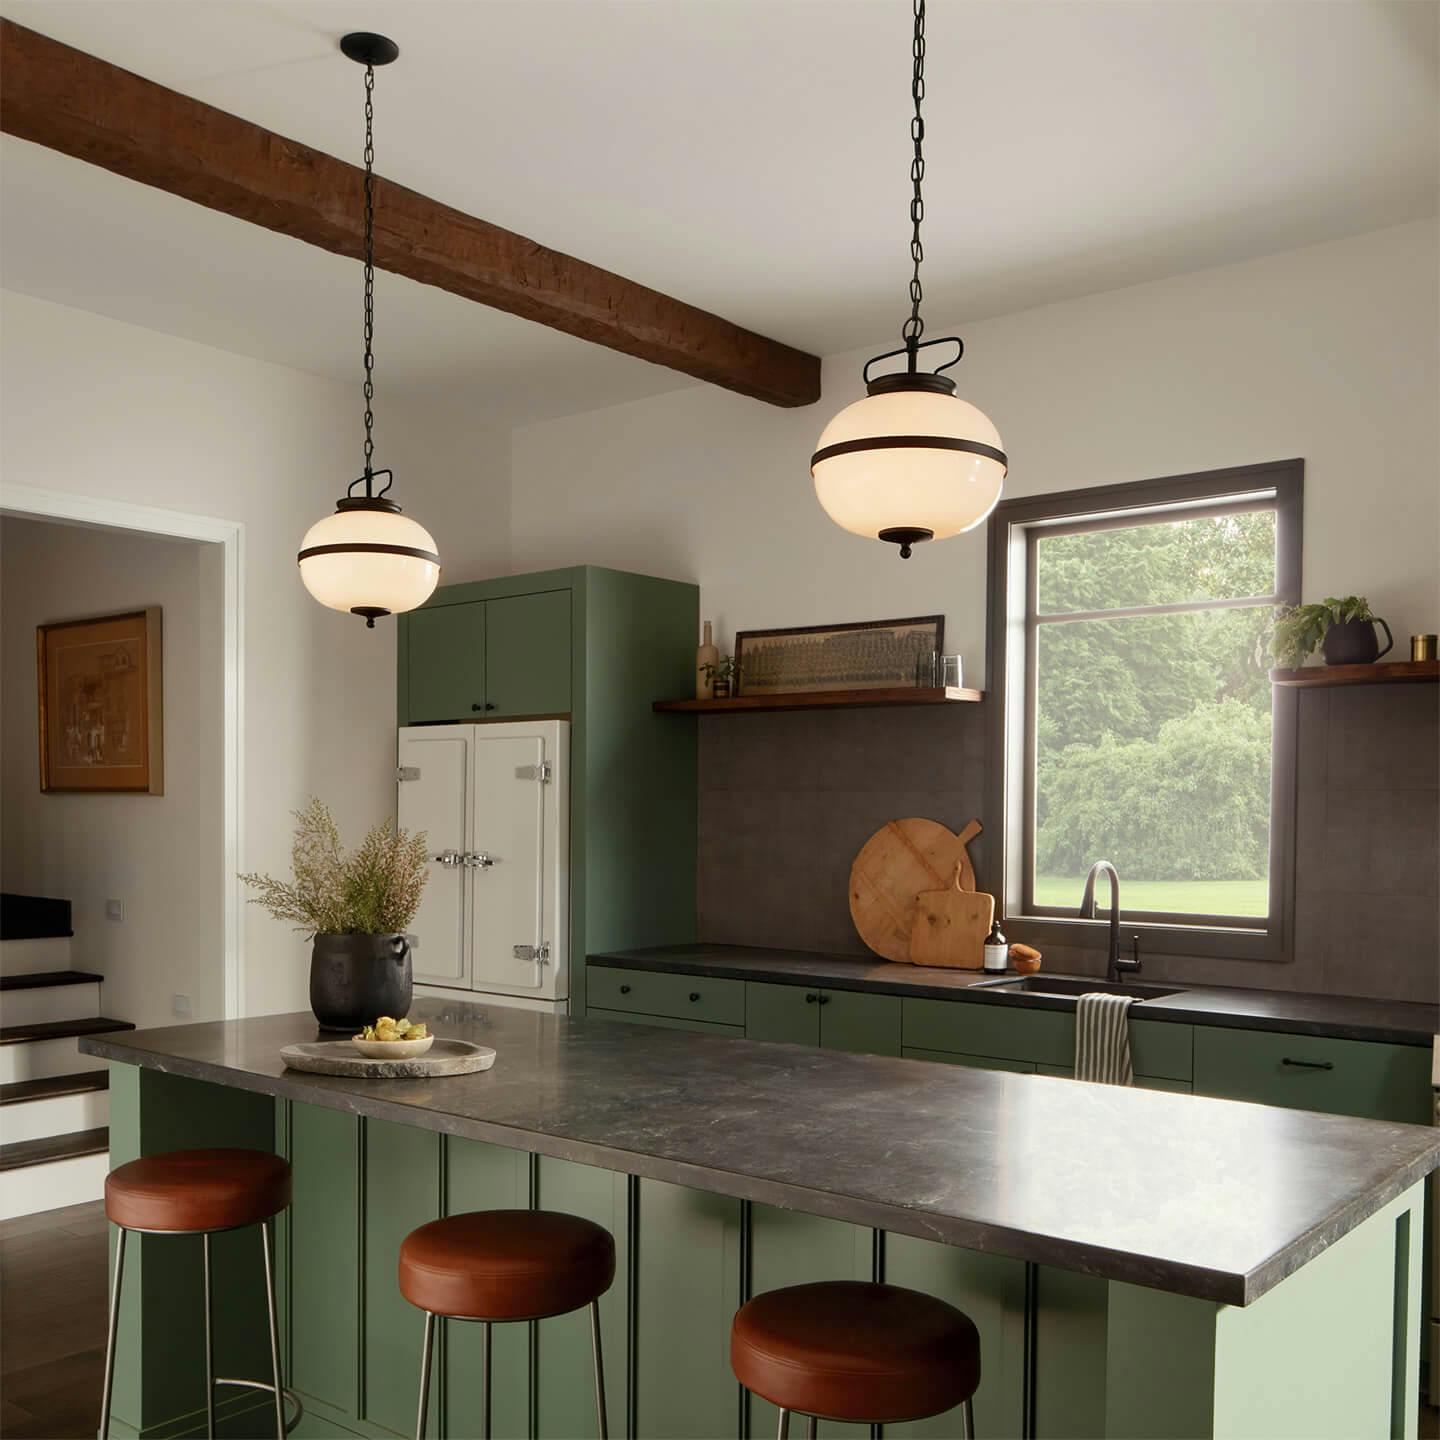 Opal pendants over kitchen island at daytime.